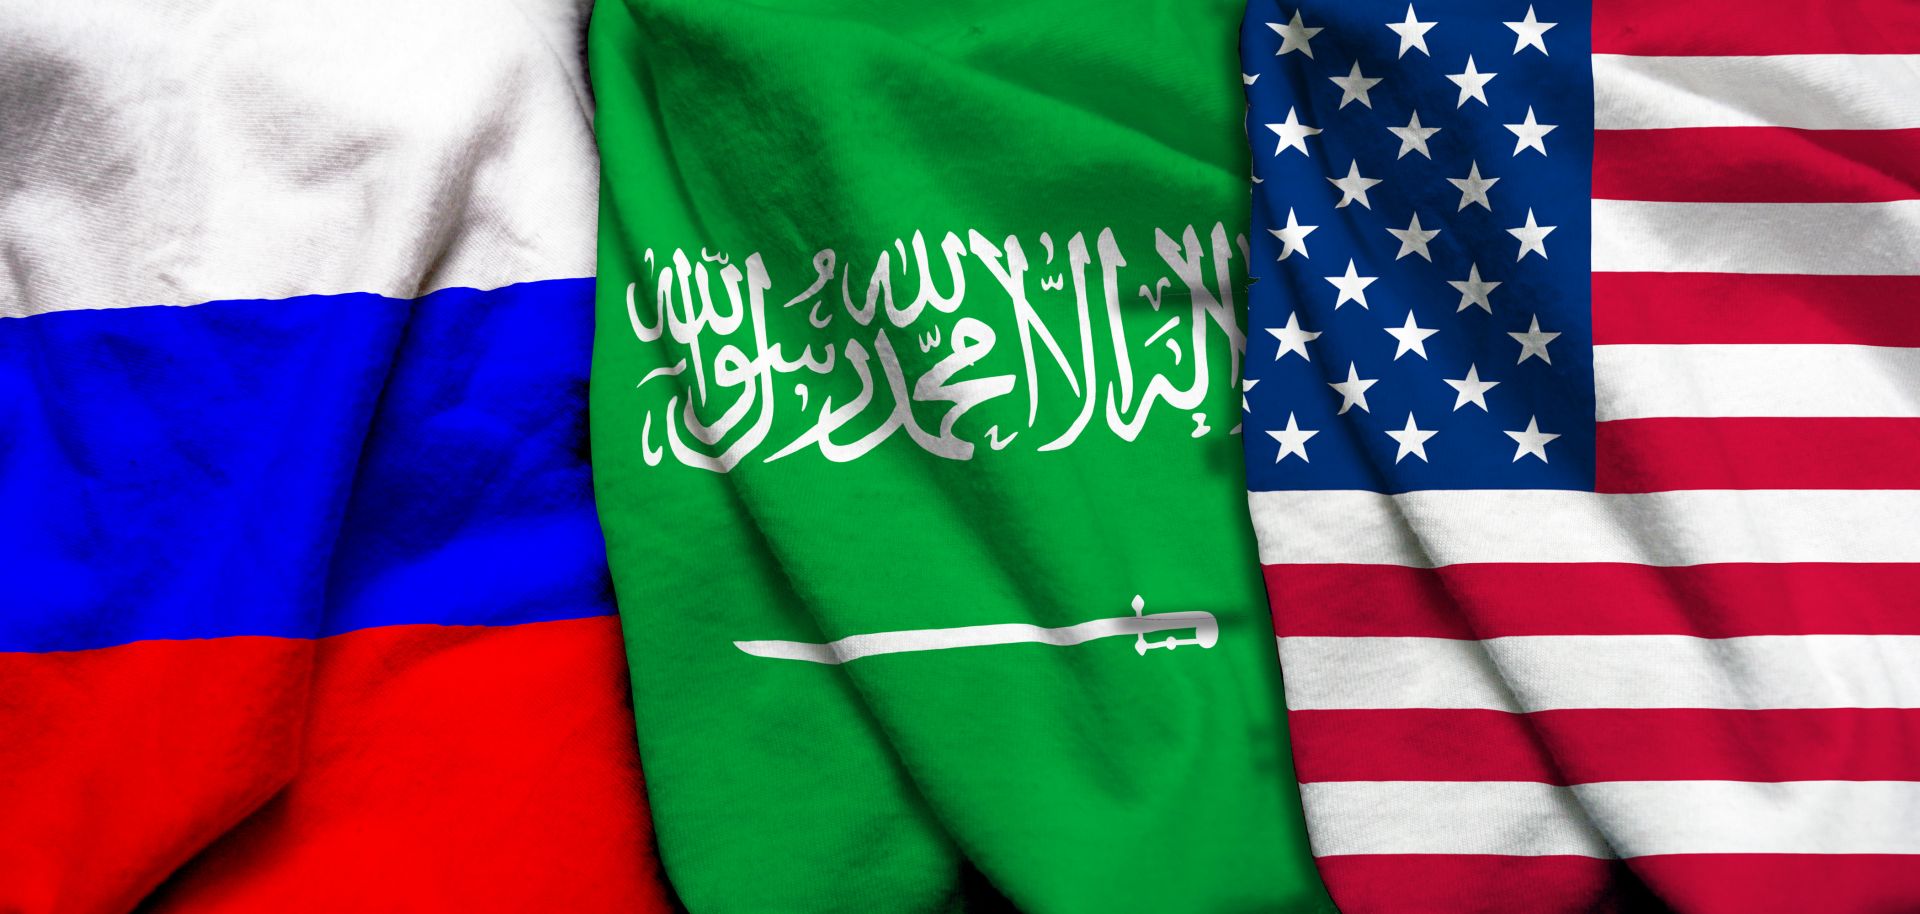 An impage shows the Russian, Saudi Arabian and U.S. flags from left to right. 